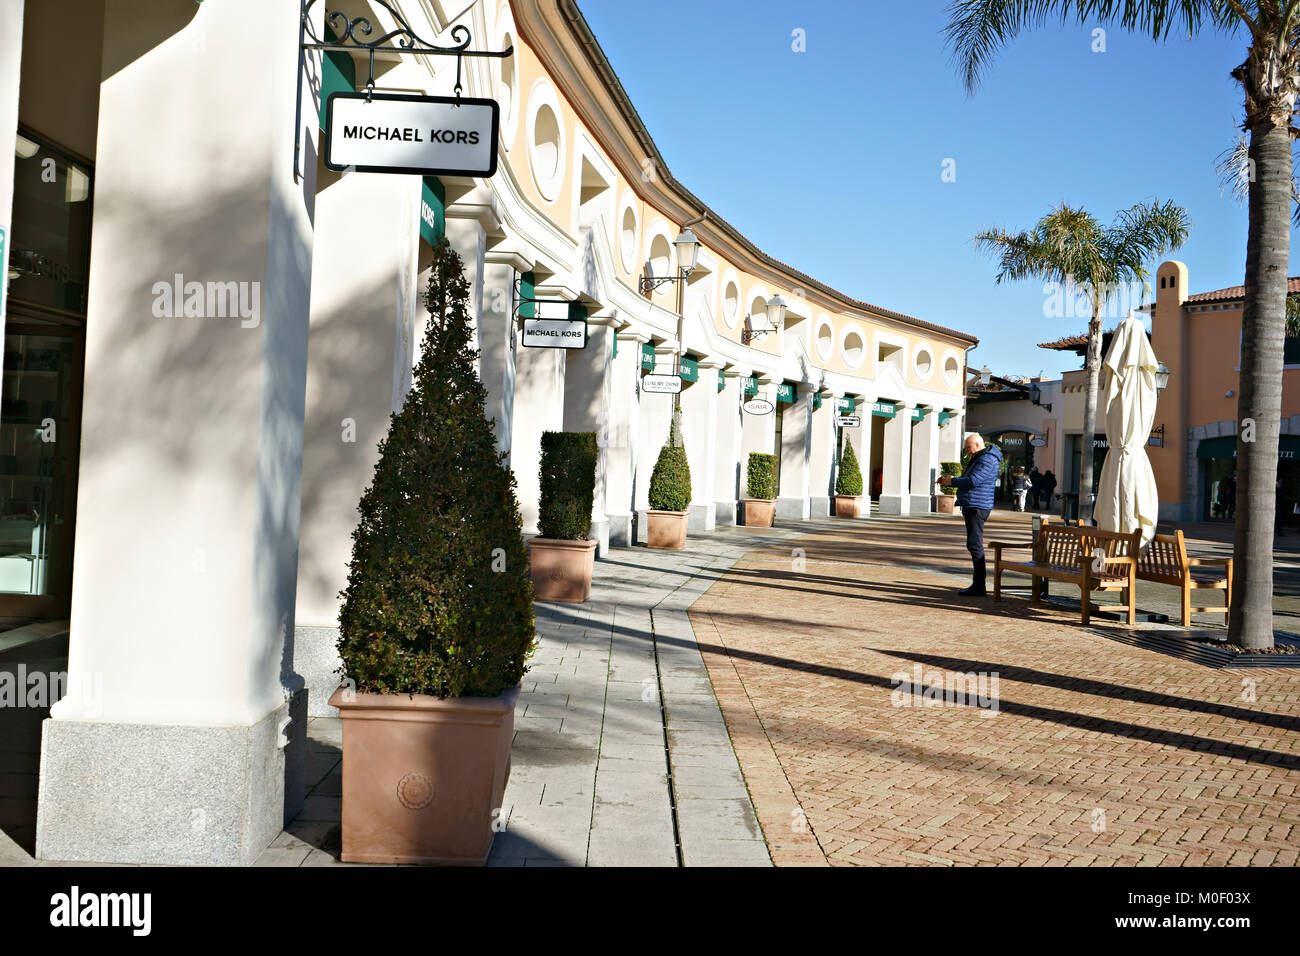 Center Shop Outlet High Resolution Stock Photography and Images - Alamy